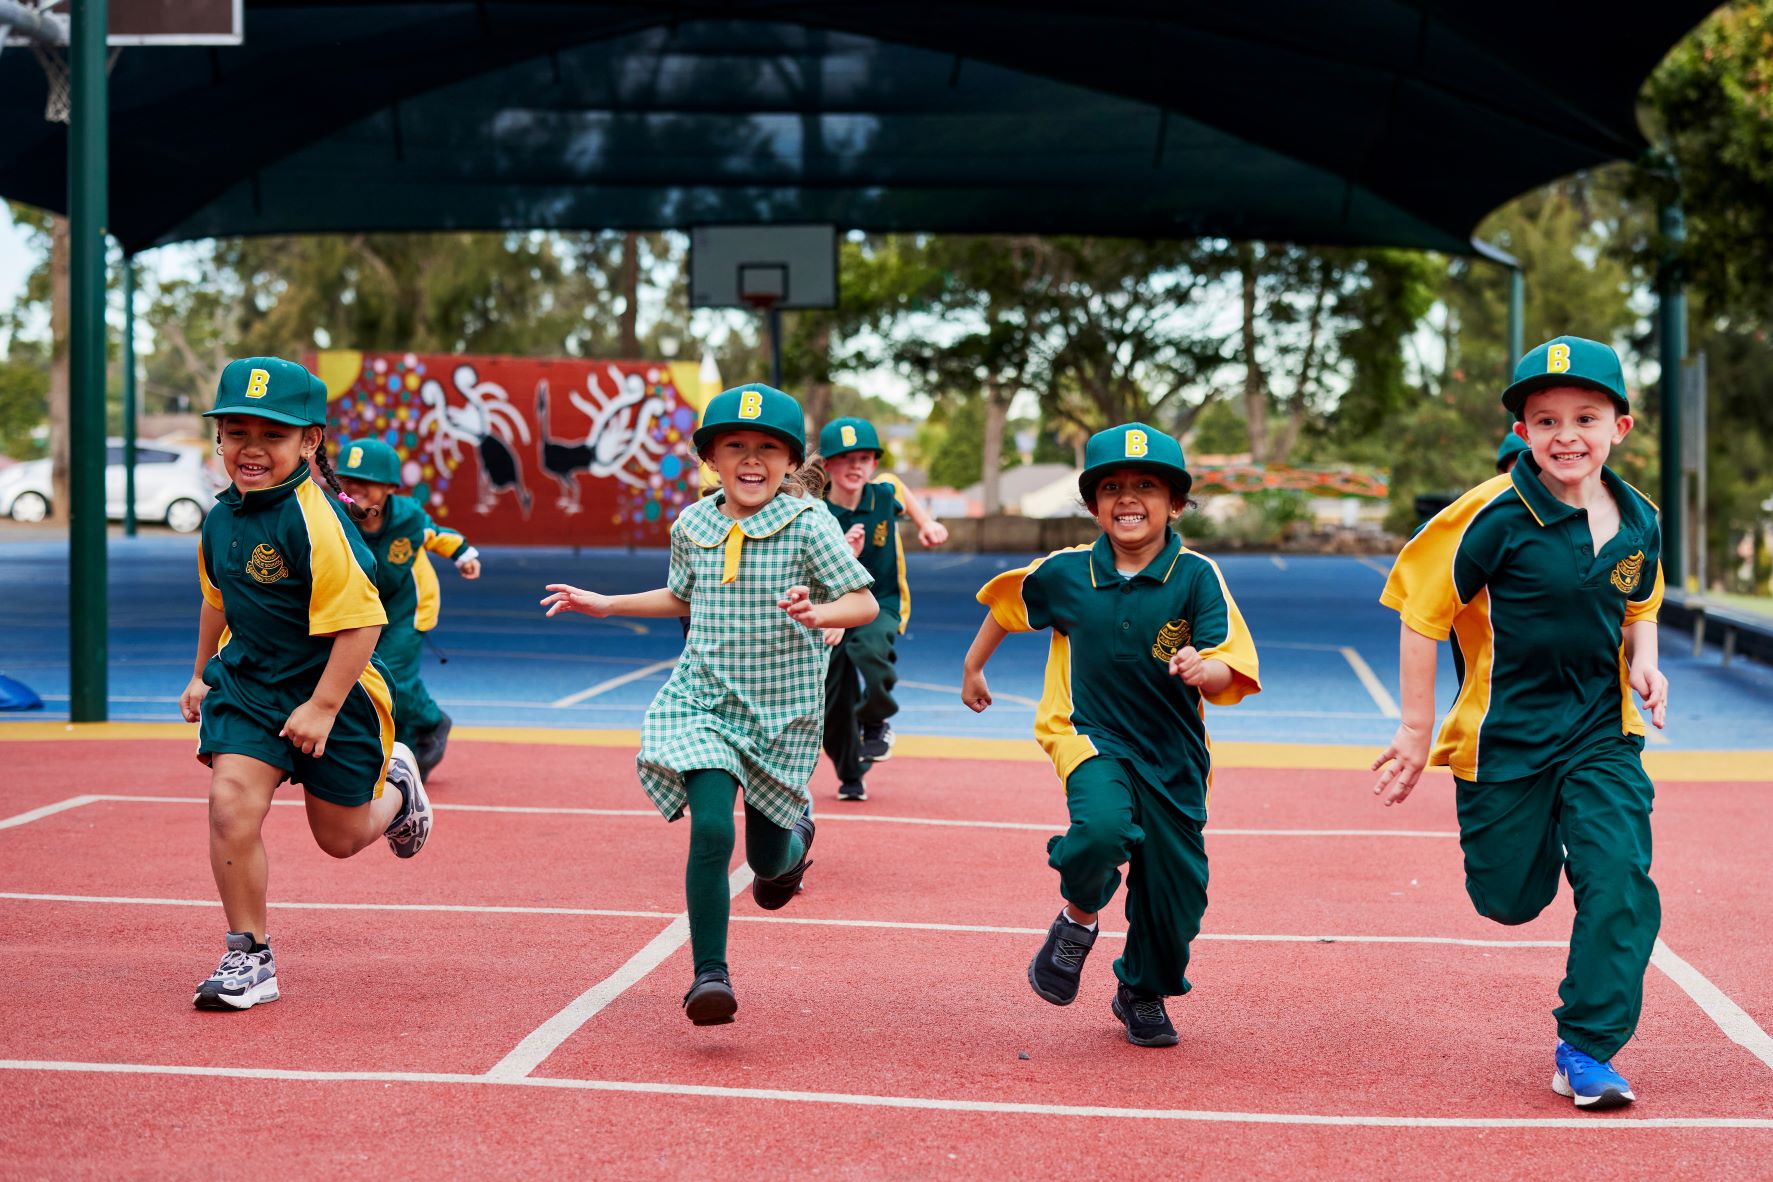 Students running in the playground